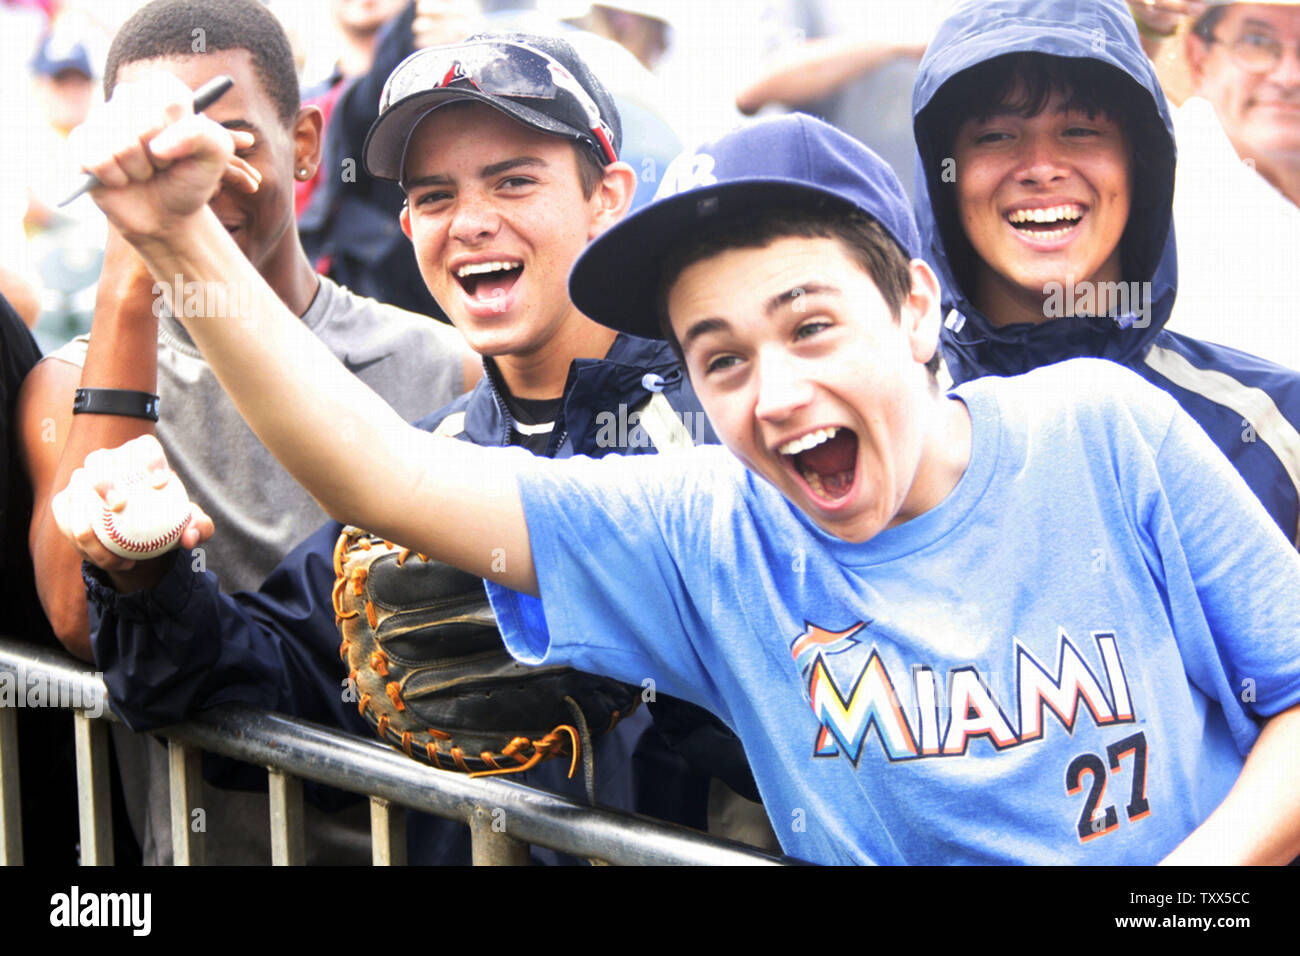 Young fans celebrate a Miami Marlins home run against the New York Mets  during spring training at the Roger Dean Stadium in Jupiter, Florida on  March 15, 2012. The Miami Marlins beat